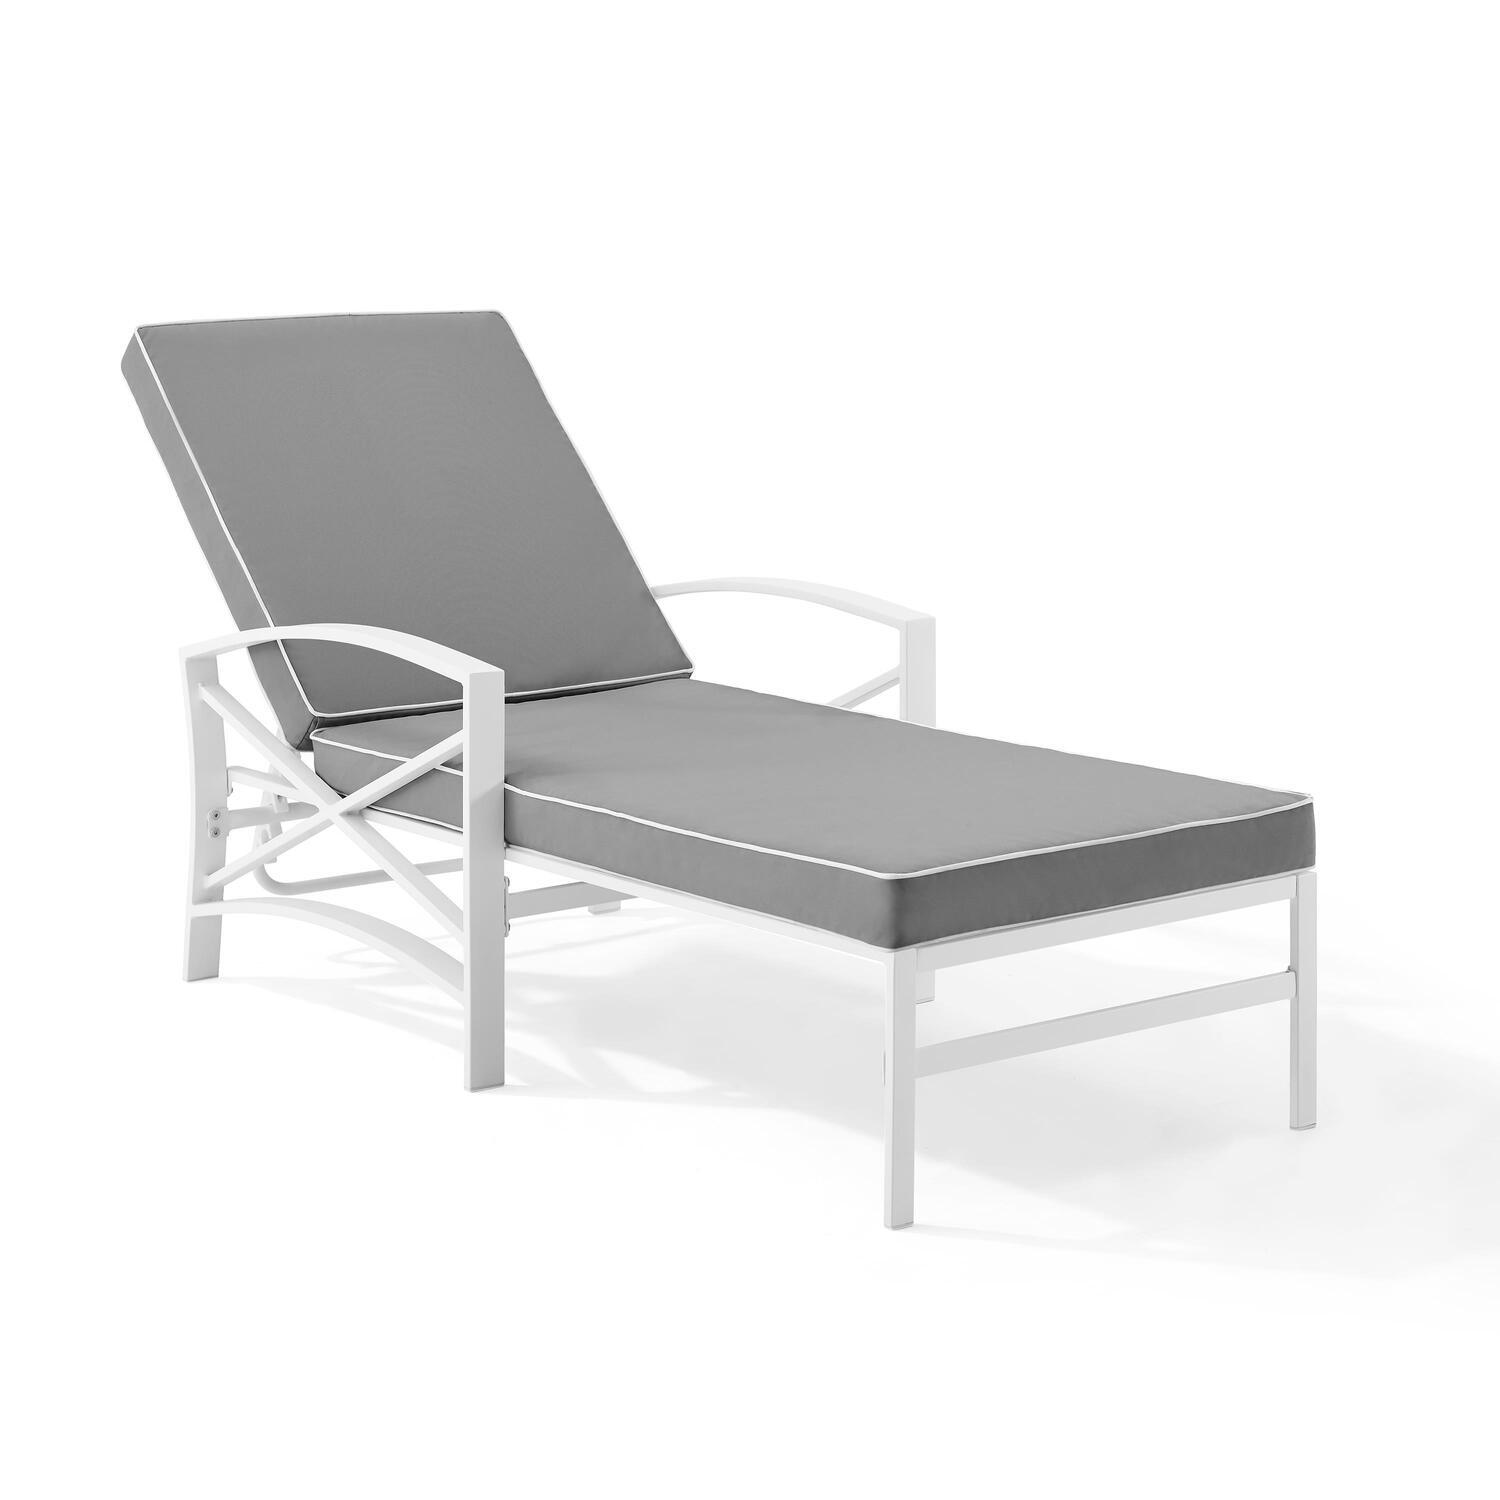 Crosley Kaplan Metal Patio Chaise Lounge in Gray and White - image 1 of 10